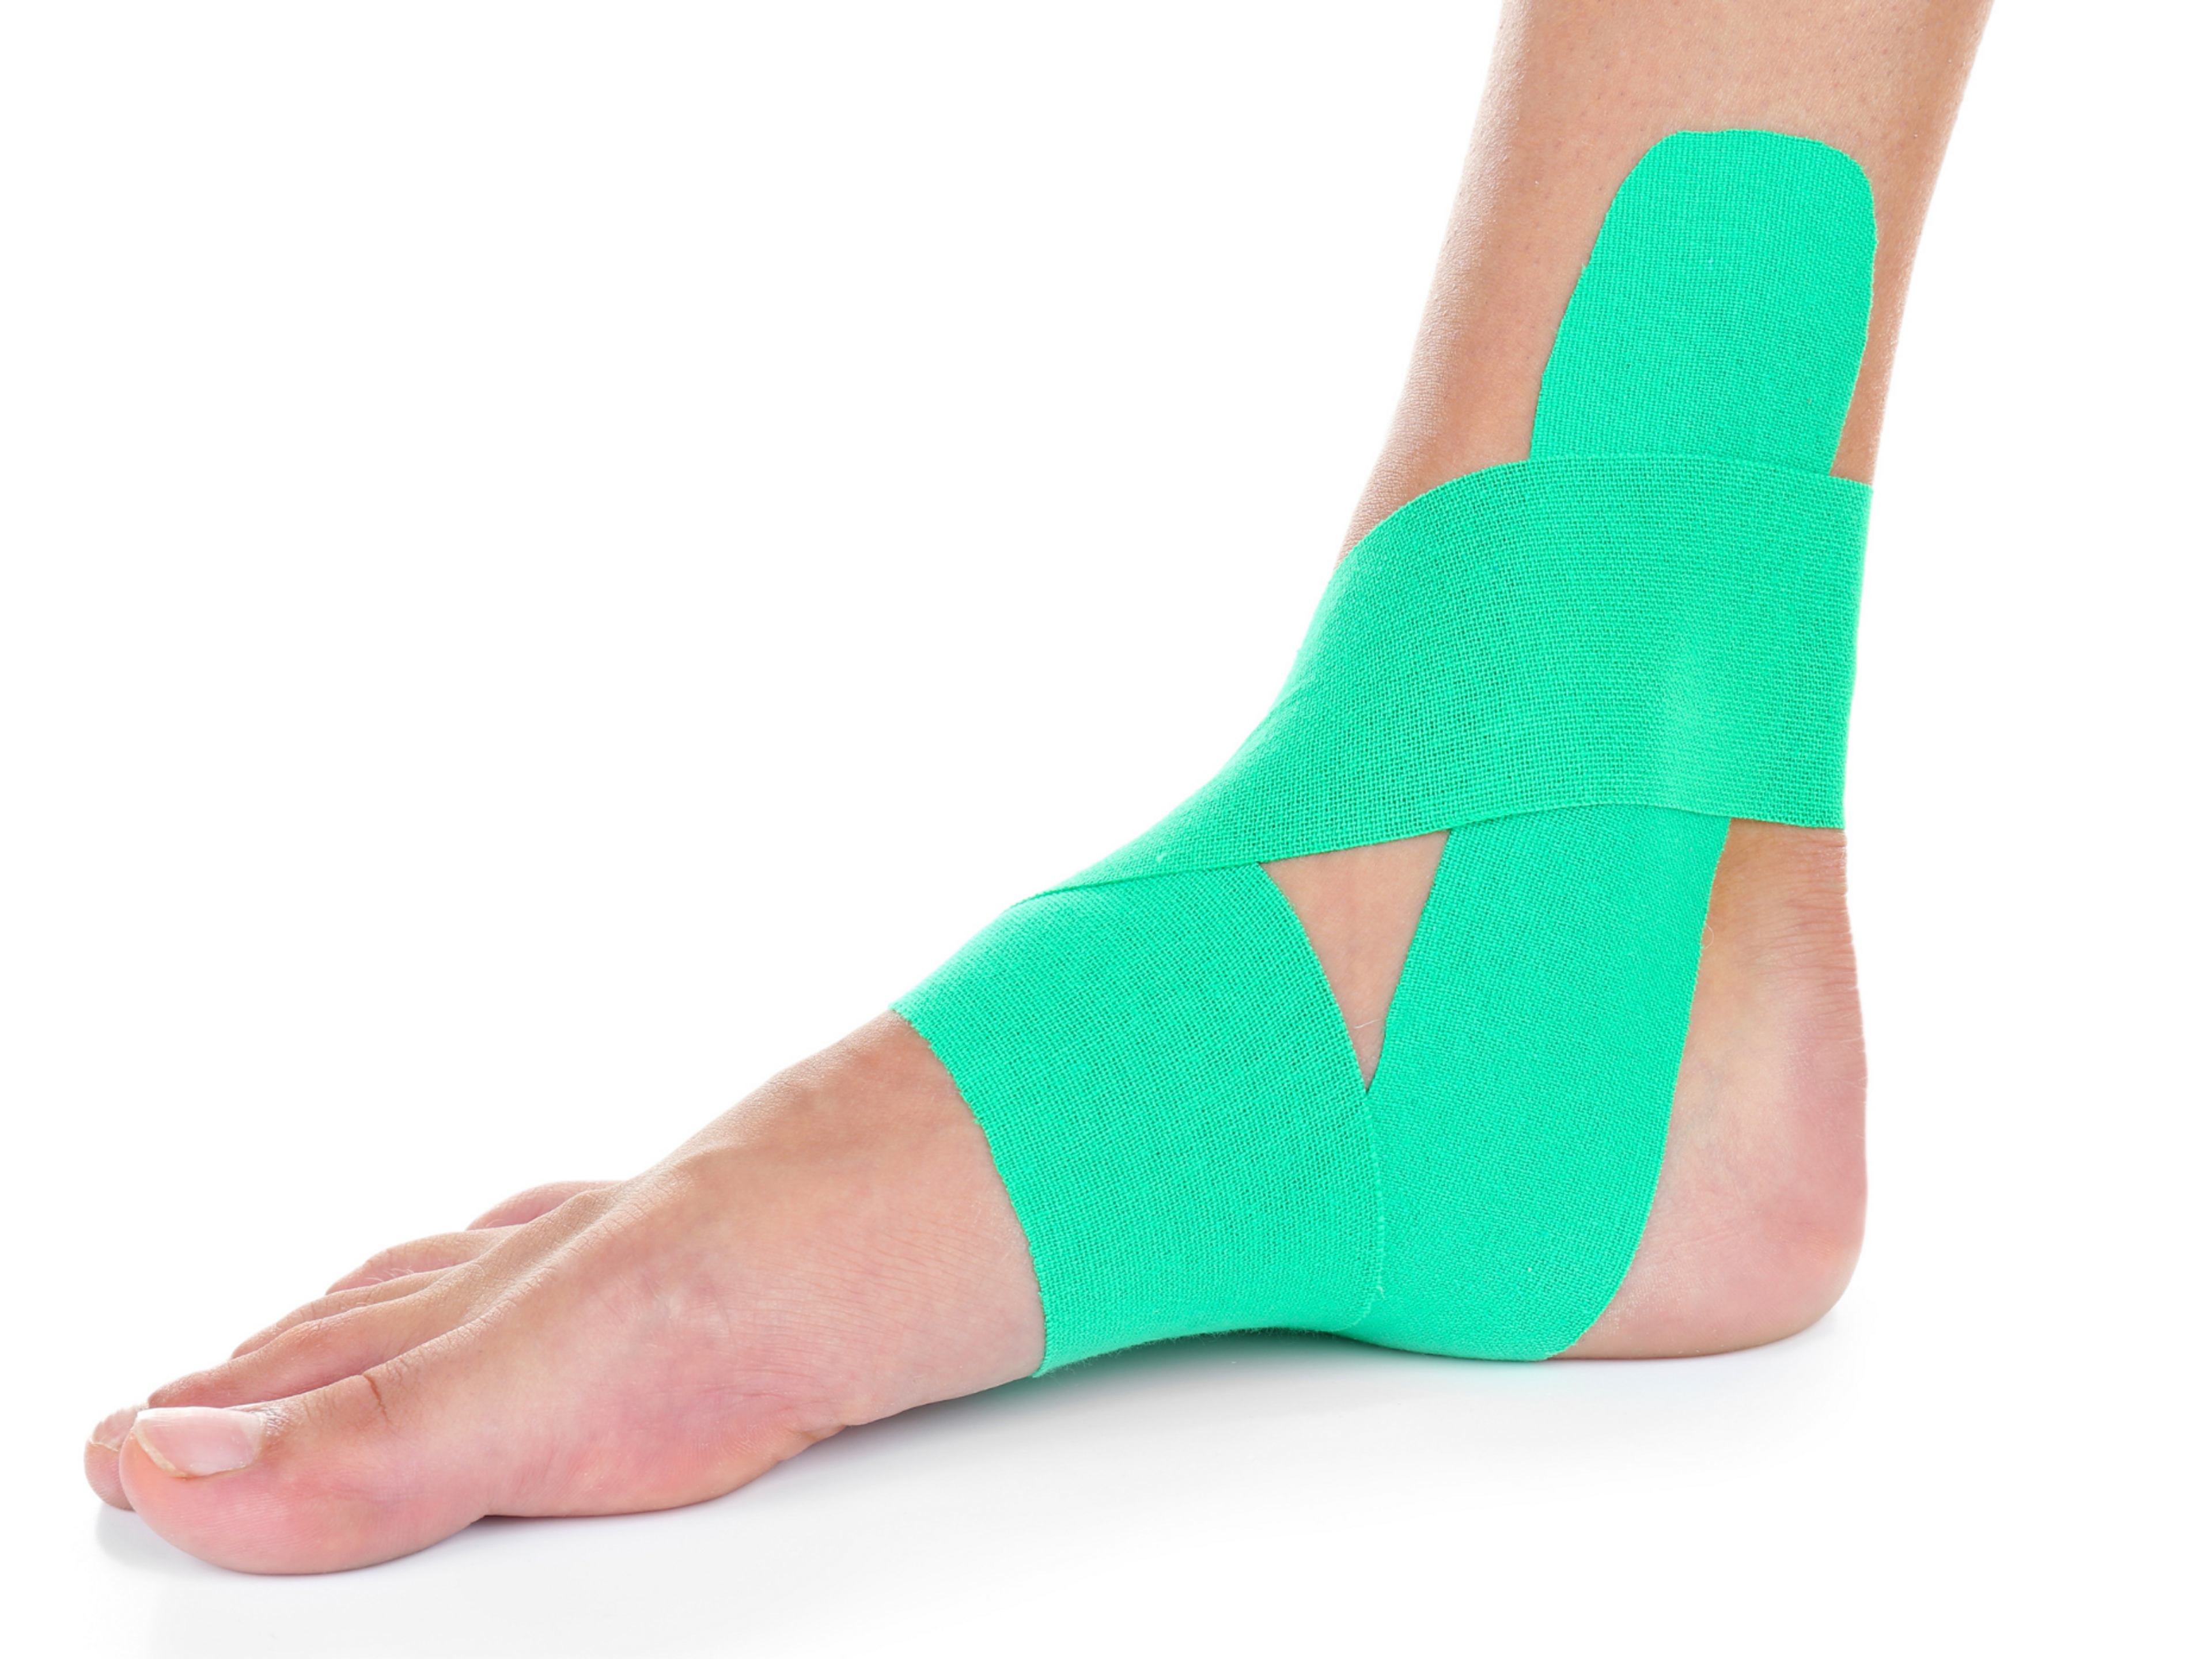 Taping your foot can help reduce the pain from plantar fasciitis. This demonstrates a kinesiology taping technique but low dye may work better.